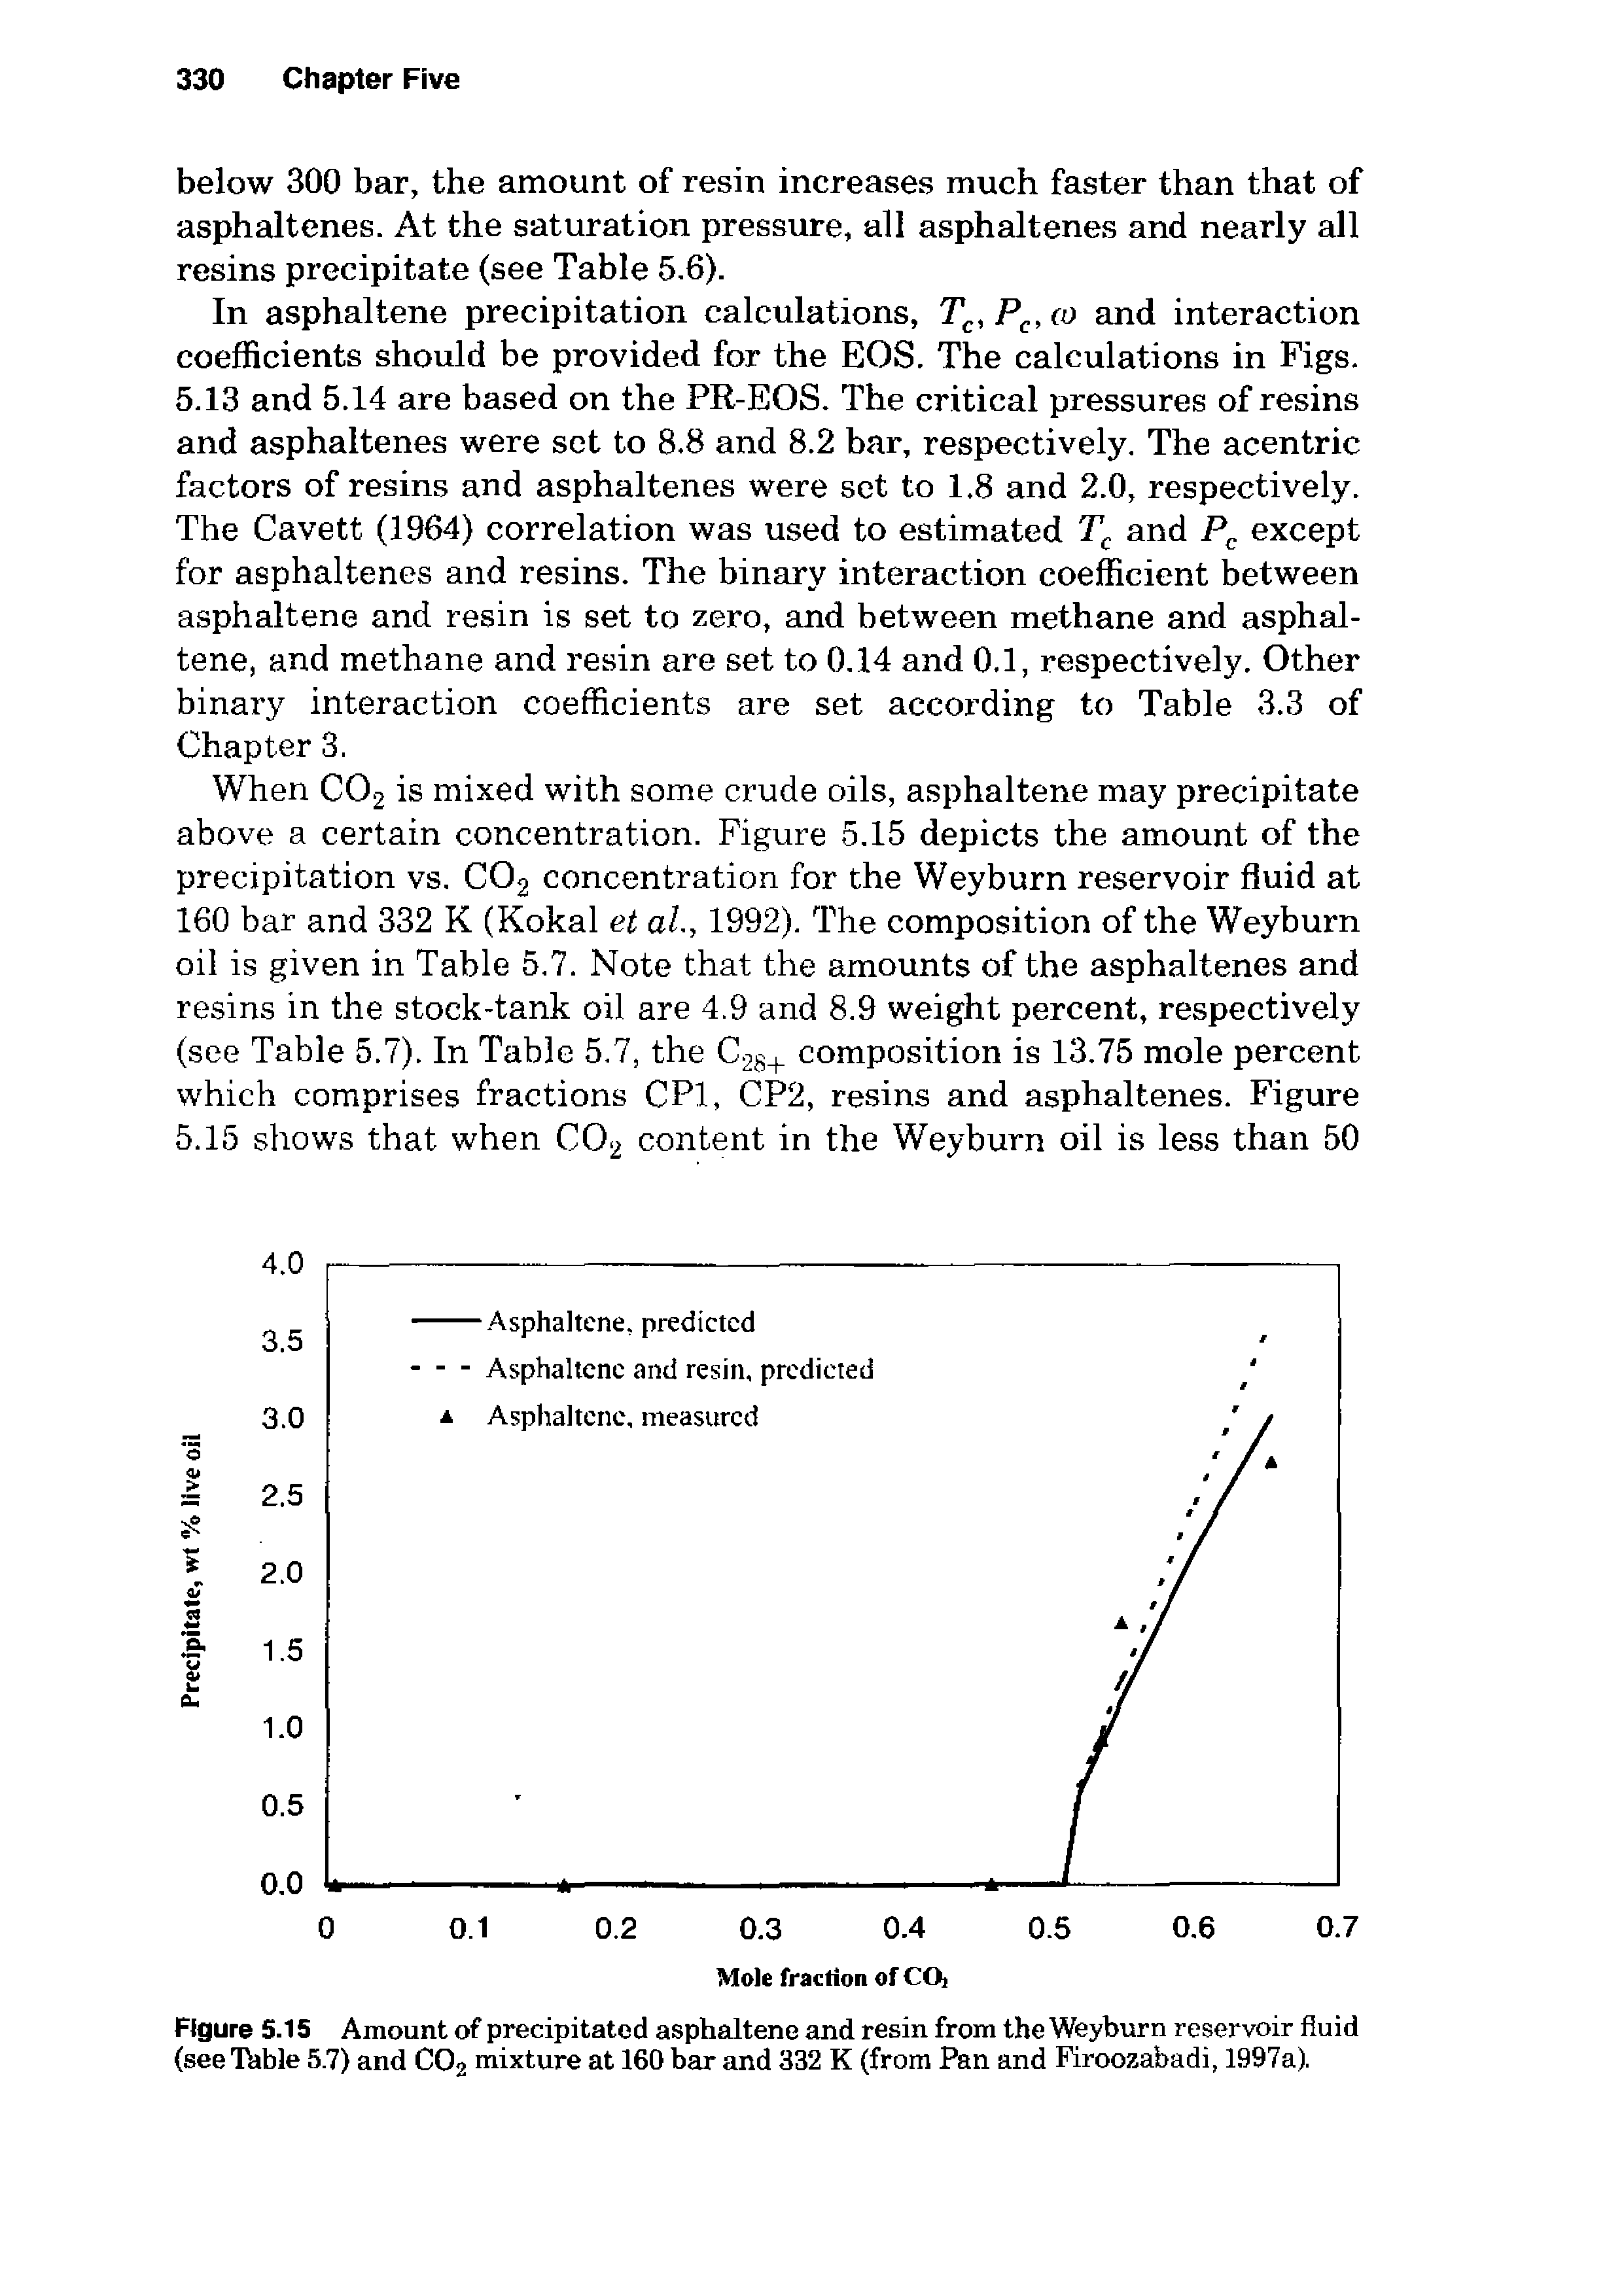 Figure 5.15 Amount of precipitated asphaltene and resin from the Weyburn reservoir fluid (seelhble 5.7) and CO2 mixture at 160 bar and 332 K (from Pan and Firoozabadi, 1997a).